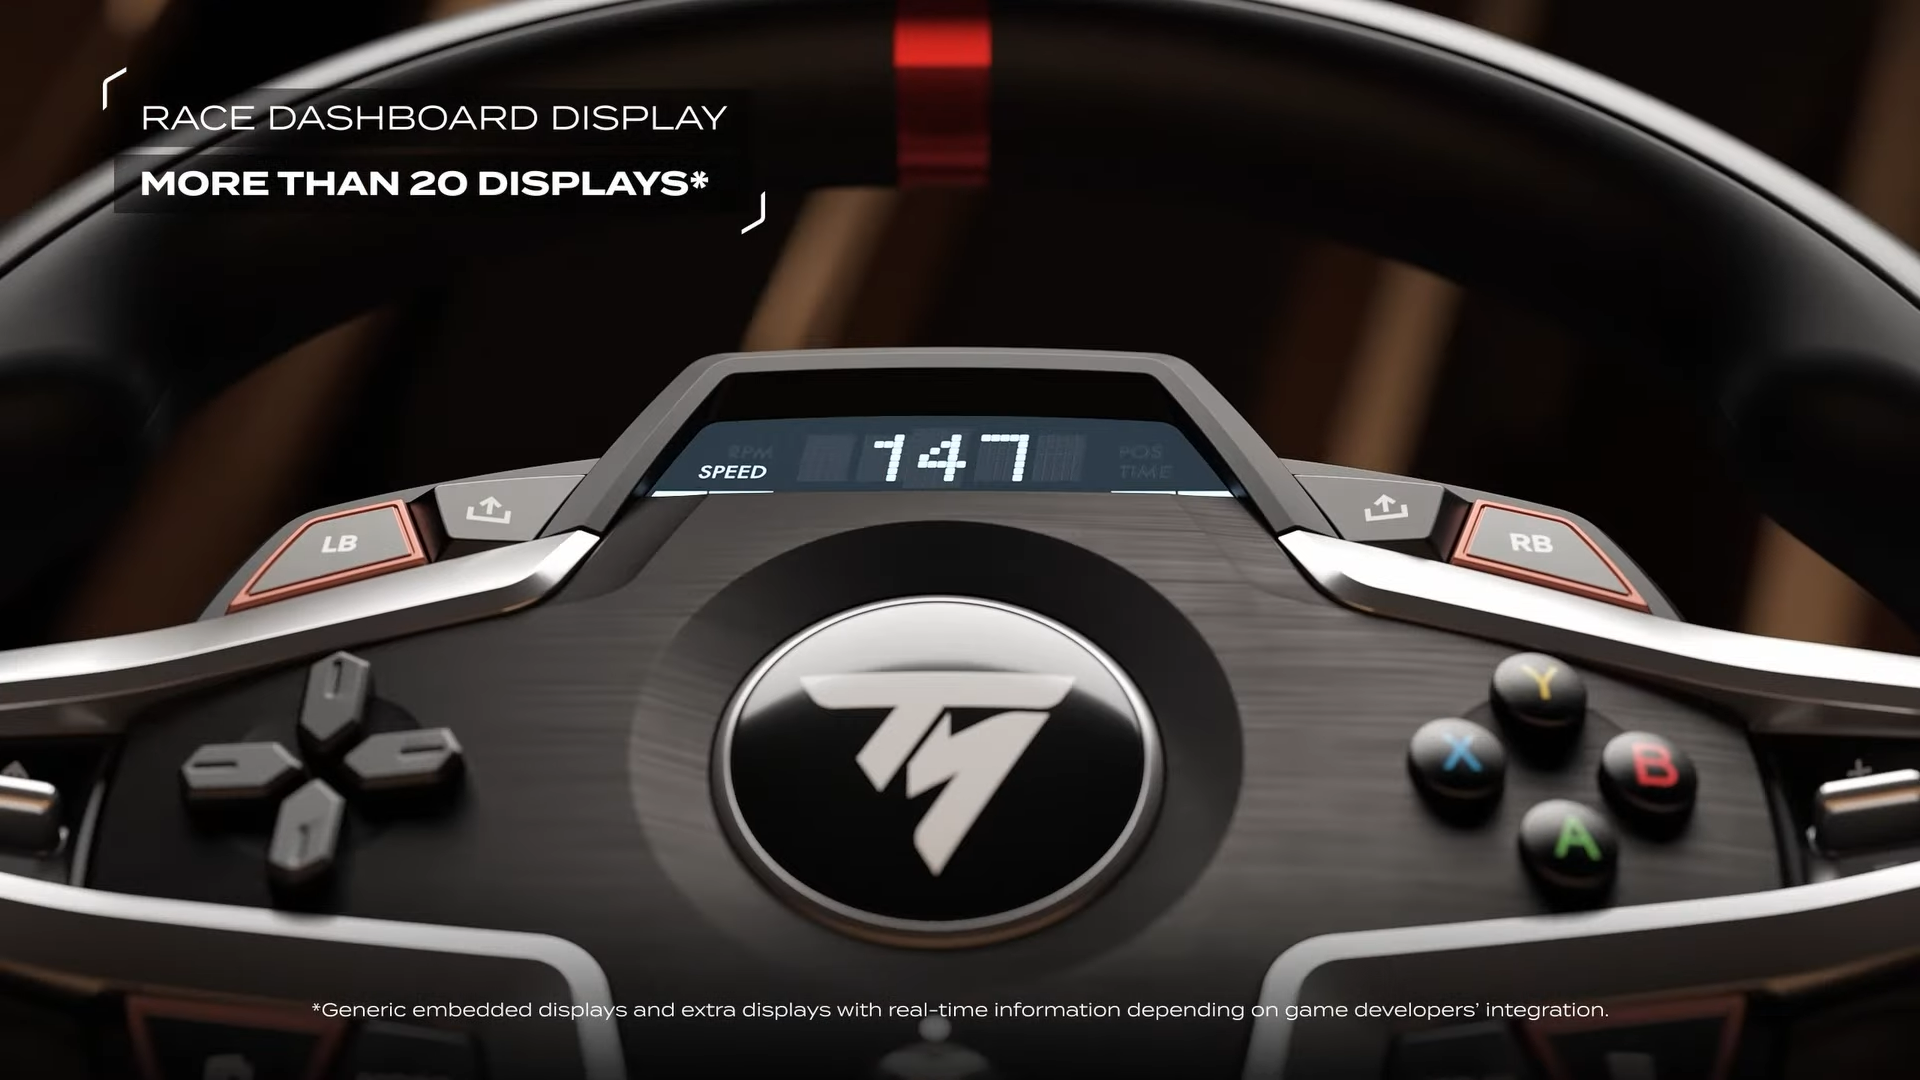 New Thrustmaster T248 racing wheel has an integrated display - 9to5Toys